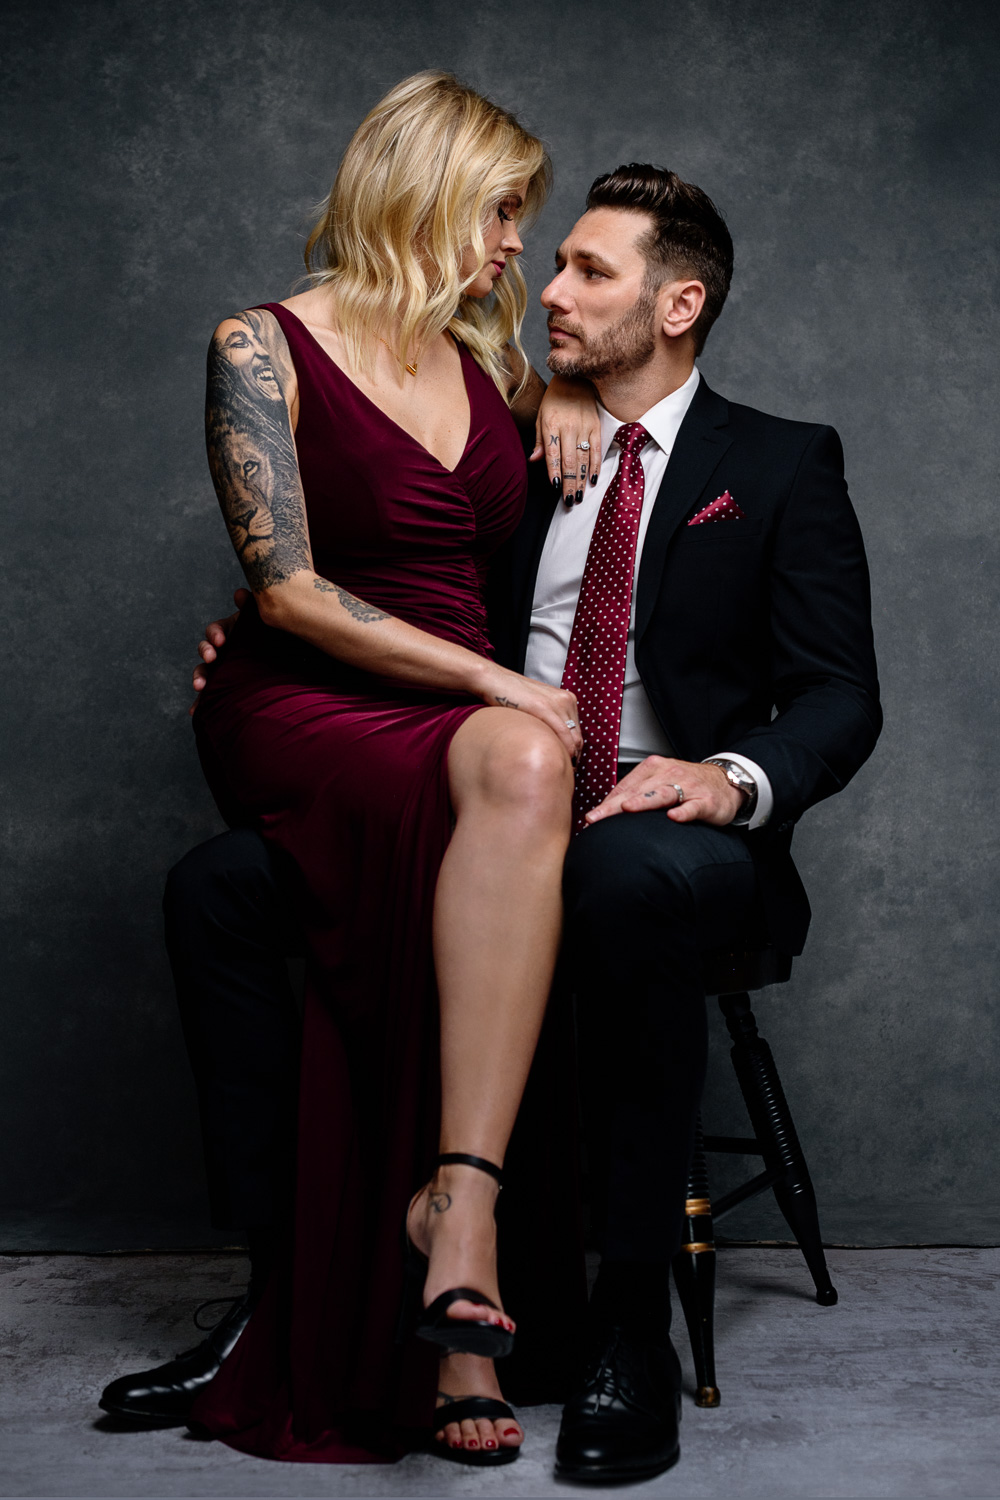 Beautiful blonde woman wearing burgundy dress with tattoos sits on husbands leg while sharing a chair